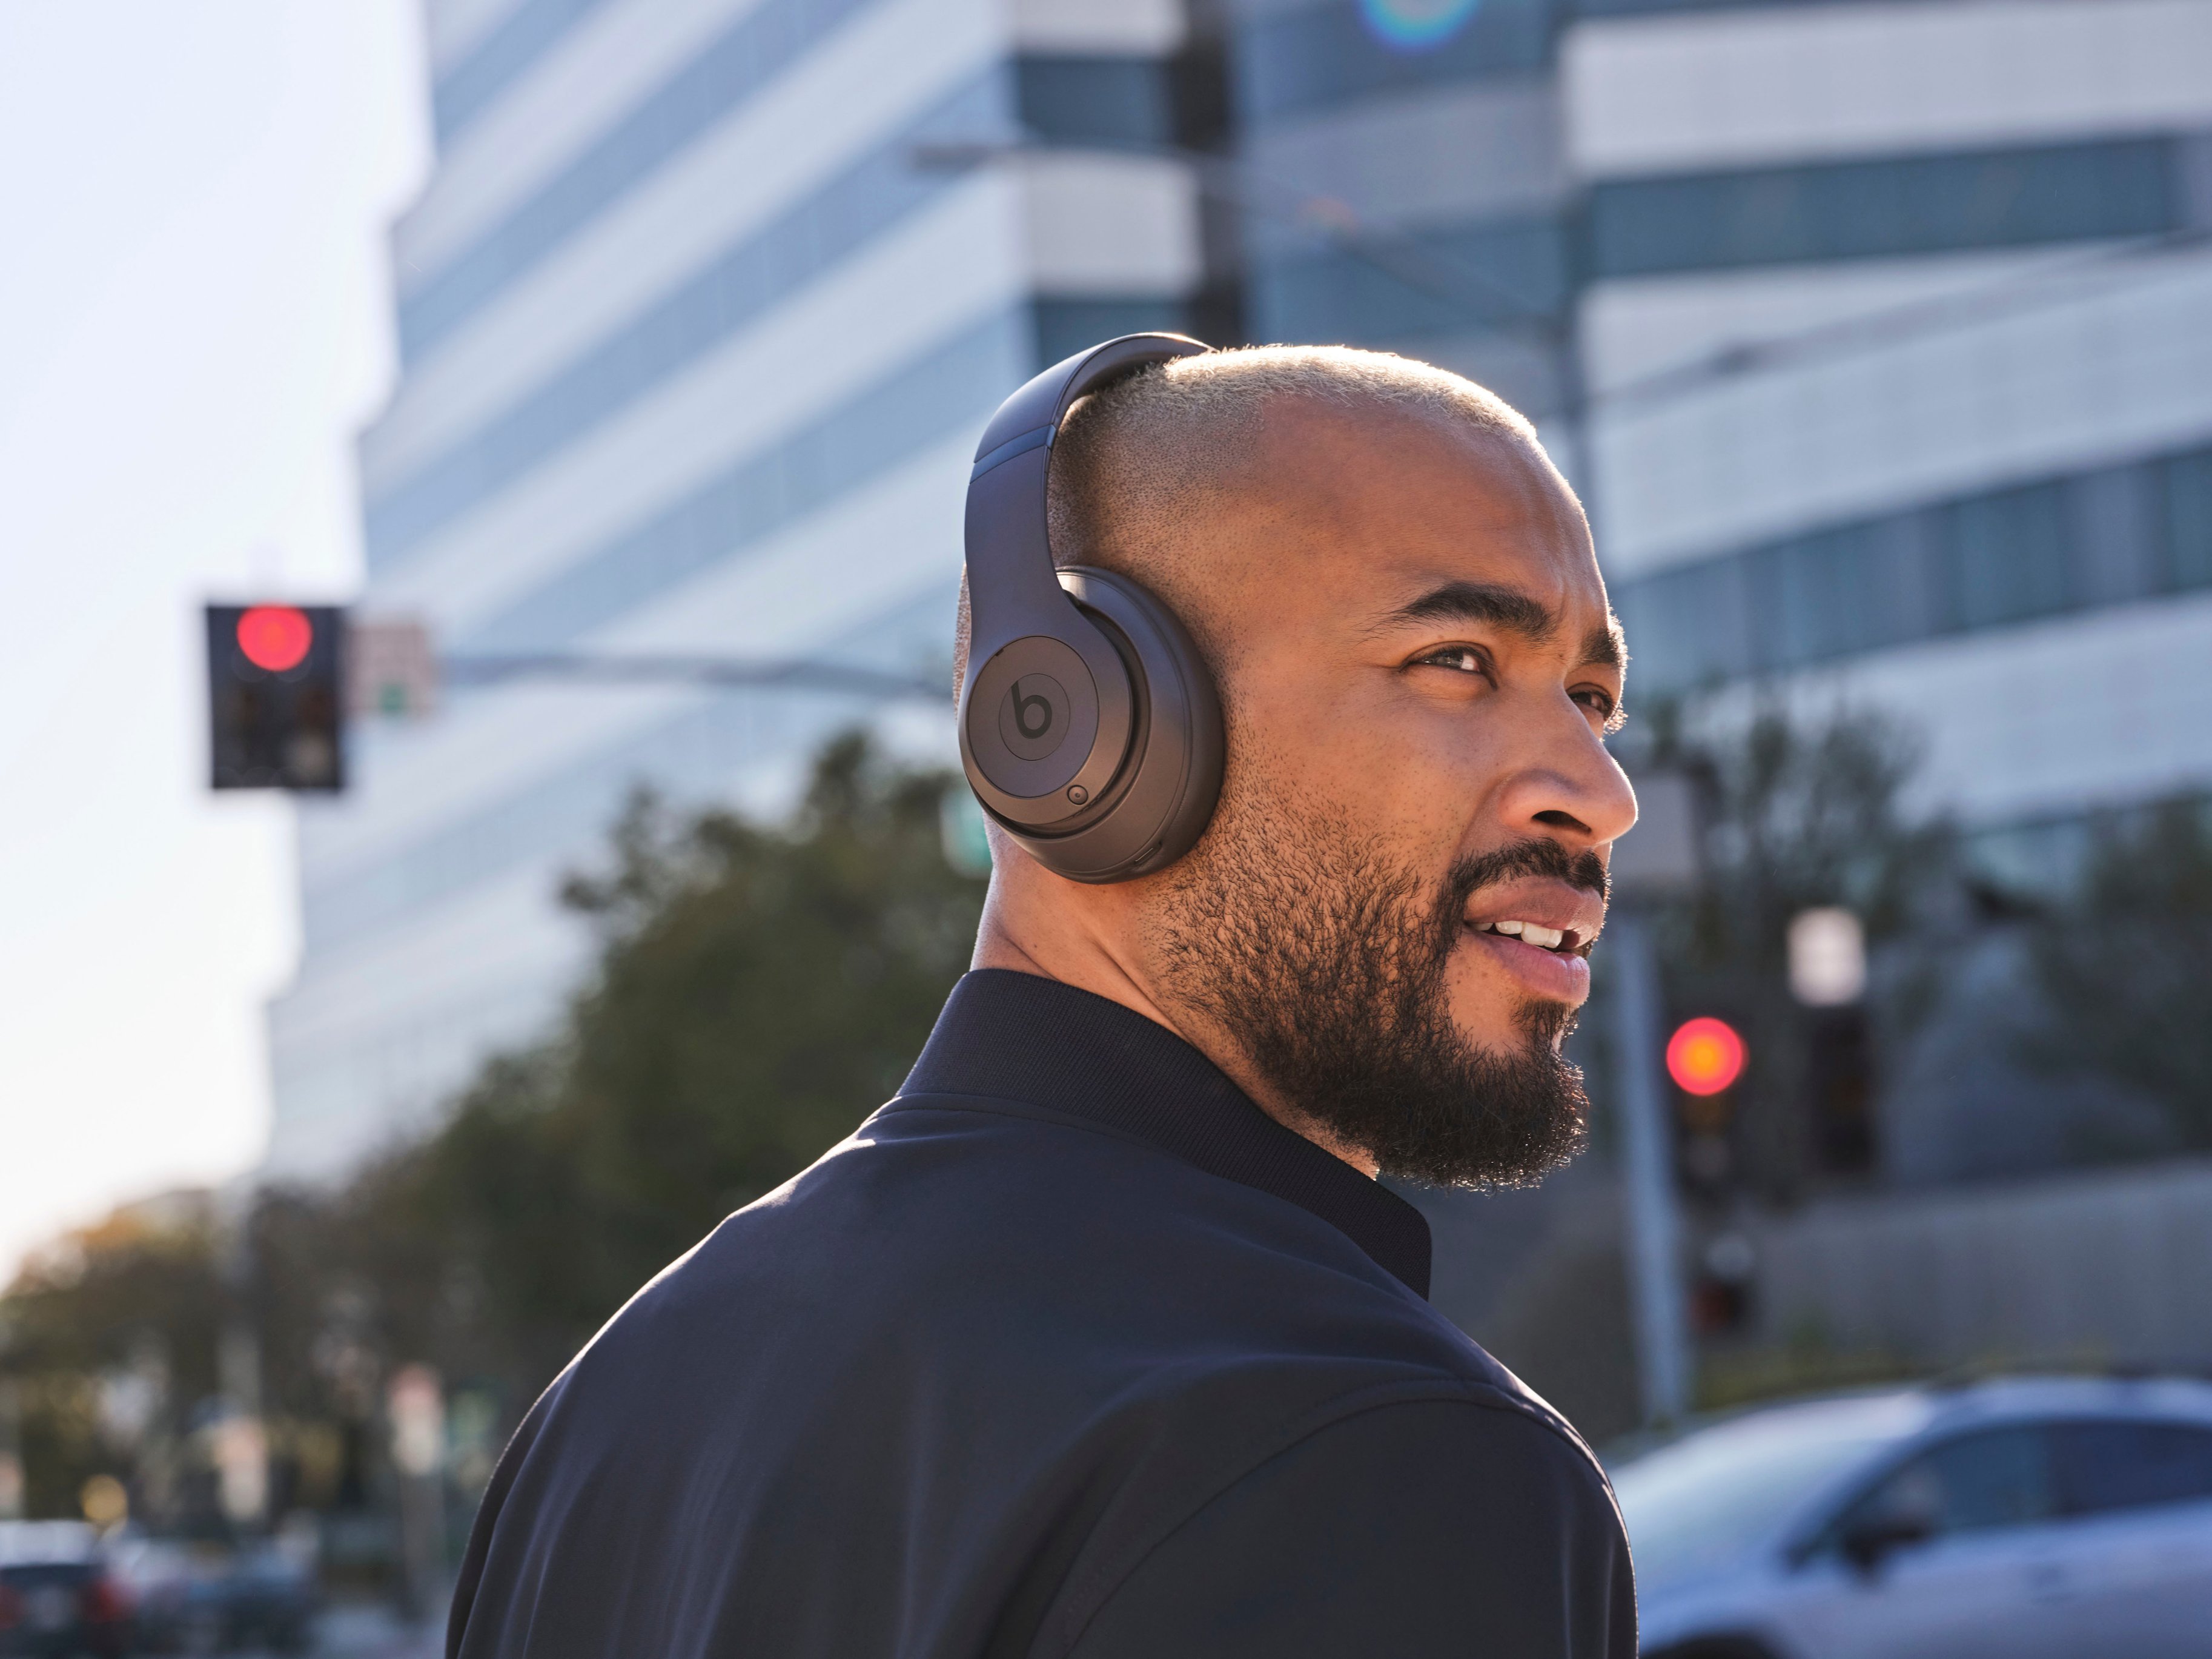 A first look at the new Beats Studio Pro headphones